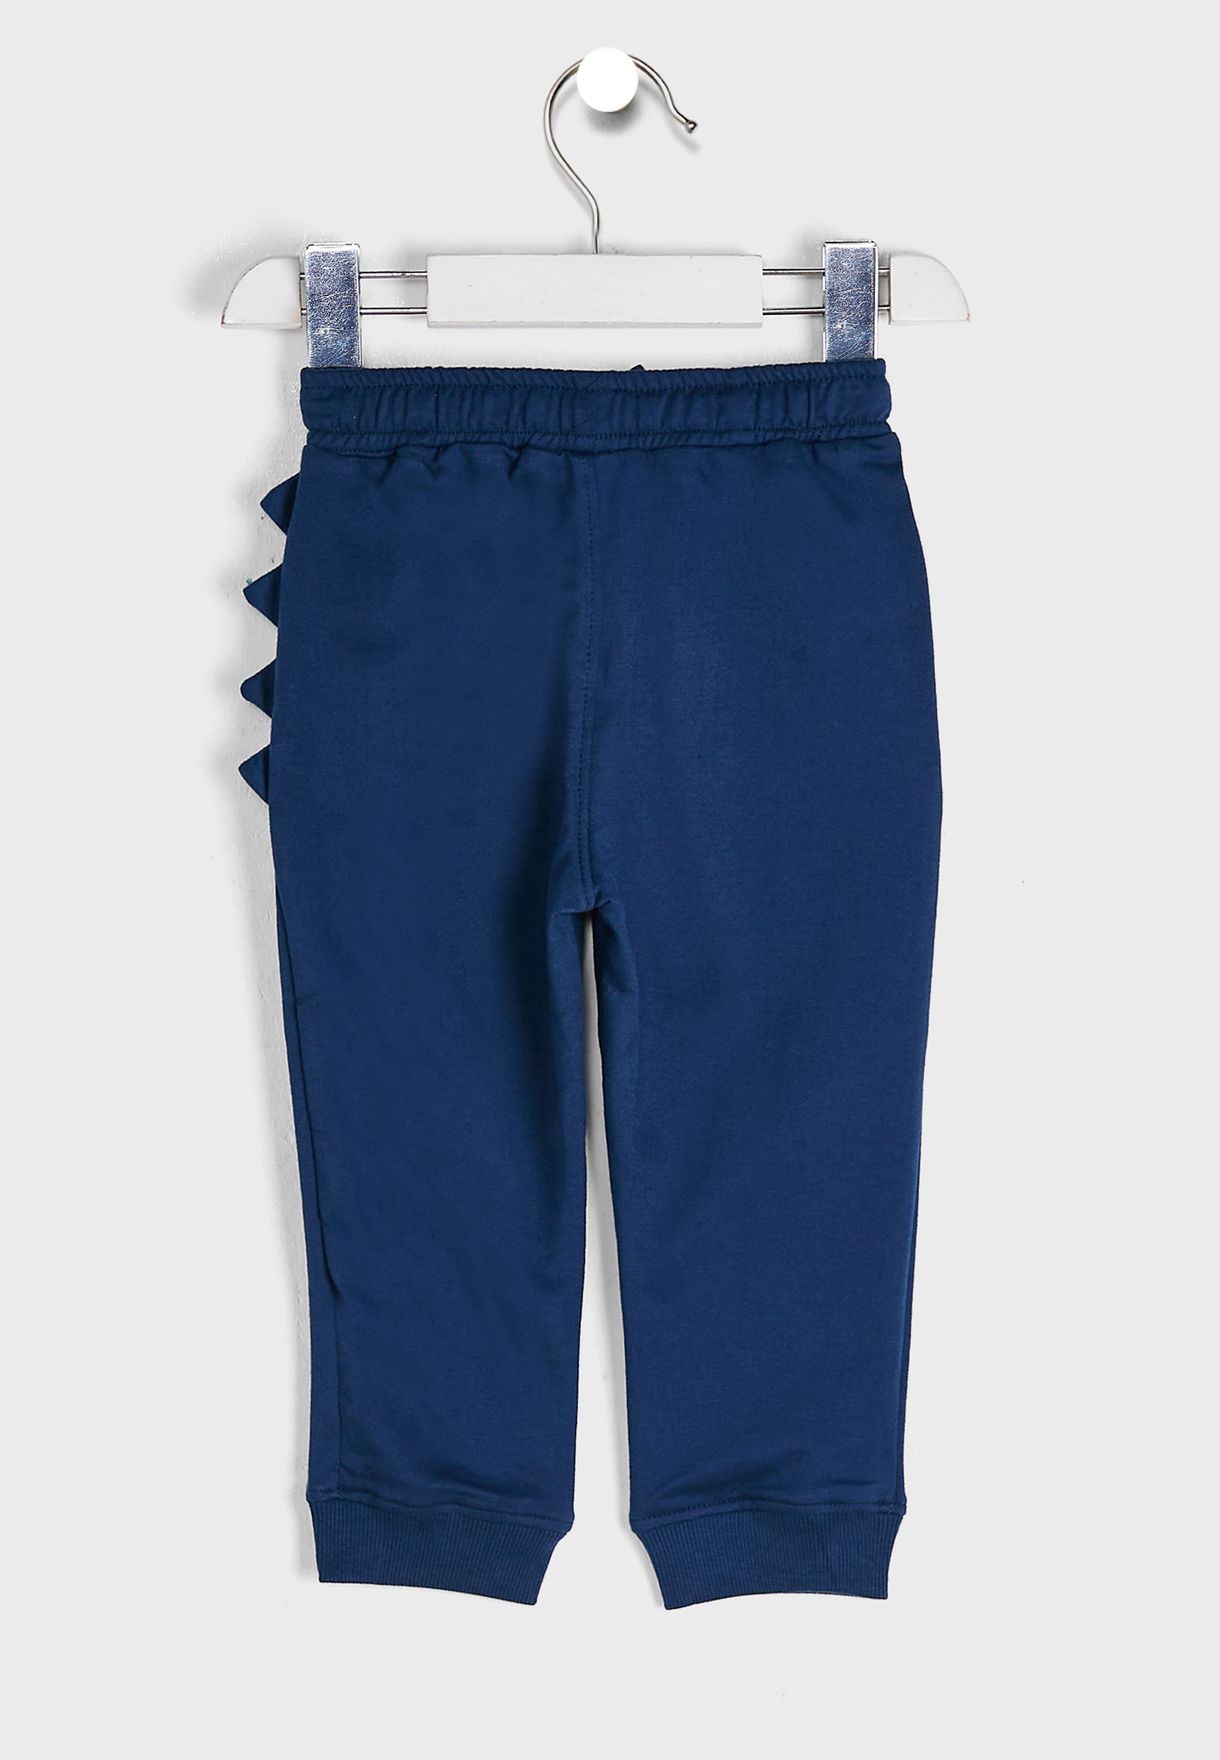 Infant Knitted Sweatpants